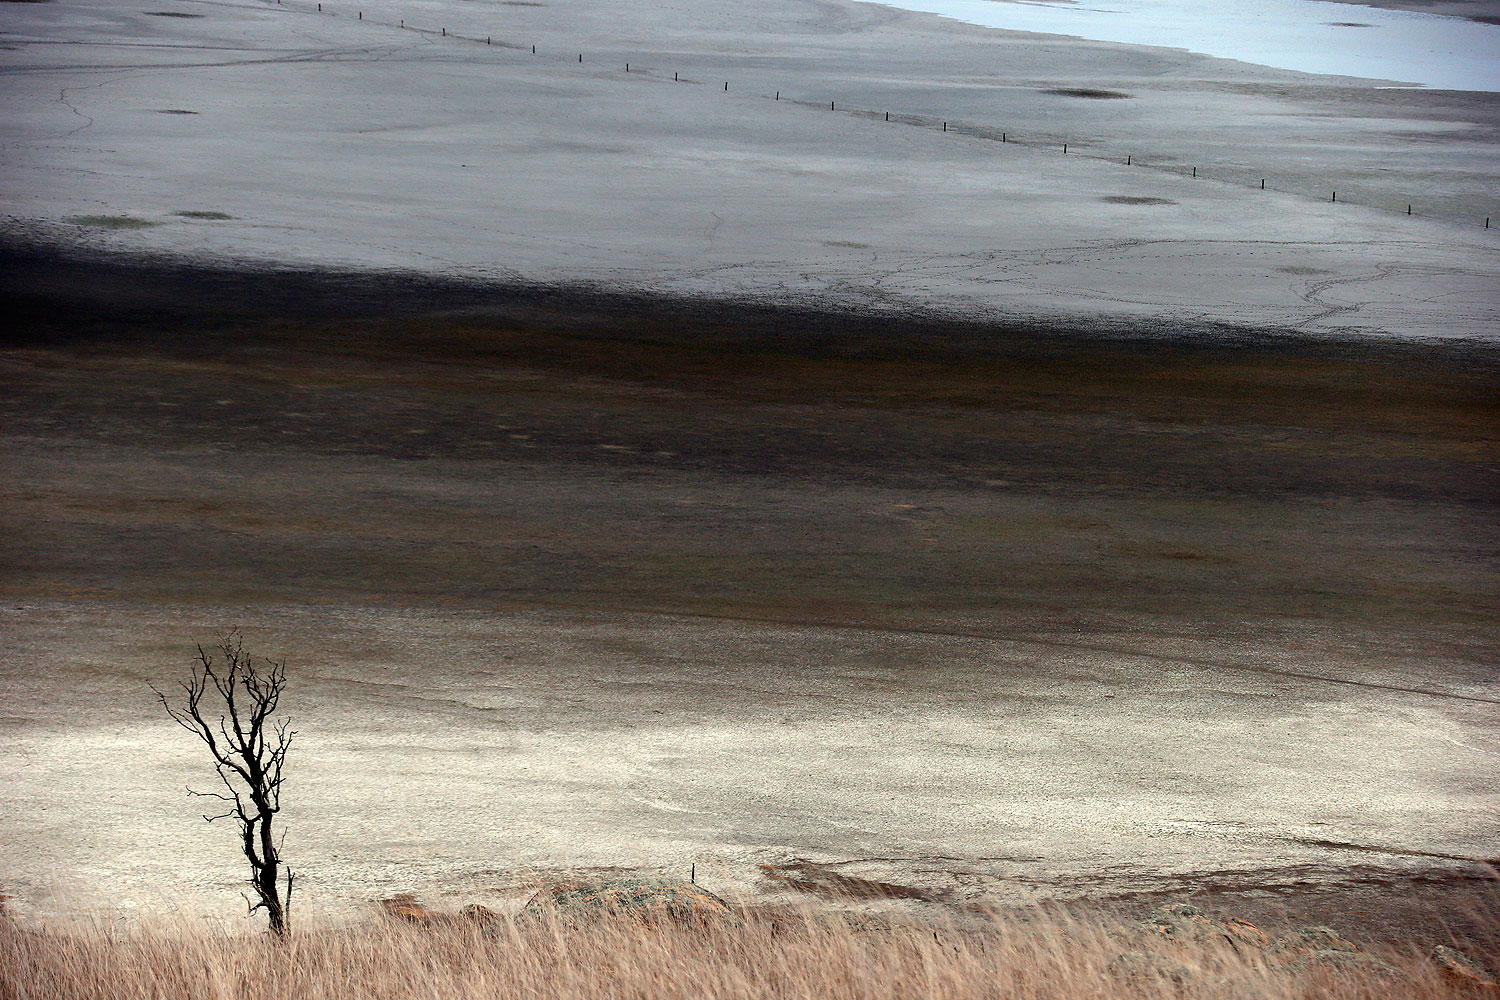 A dead tree stands in front of shallow water and a dried-up area of Lake George, located 50 km (31 miles) north of the Australian capital city of Canberra May 13, 2013 (David Gray—Reuters)